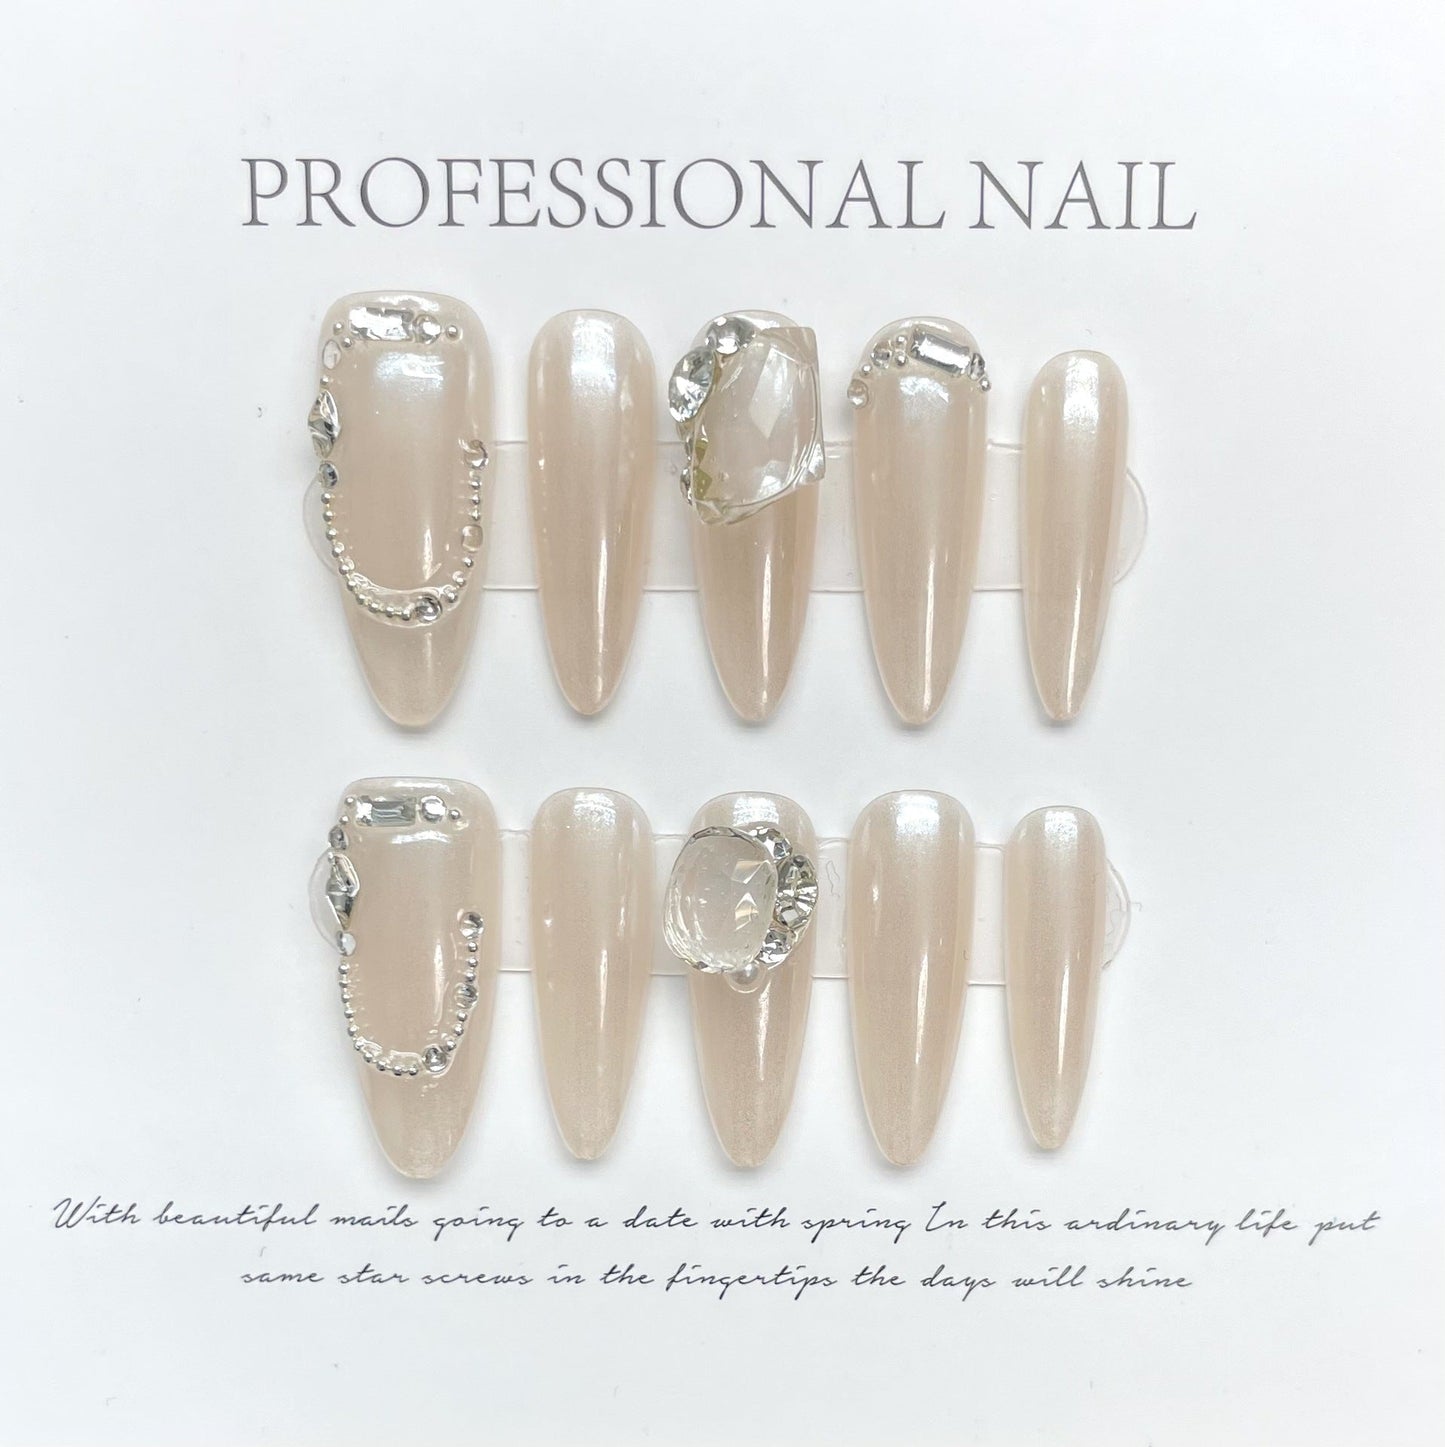 1063 first love style press on nails 100% handmade false nails sliver nude color